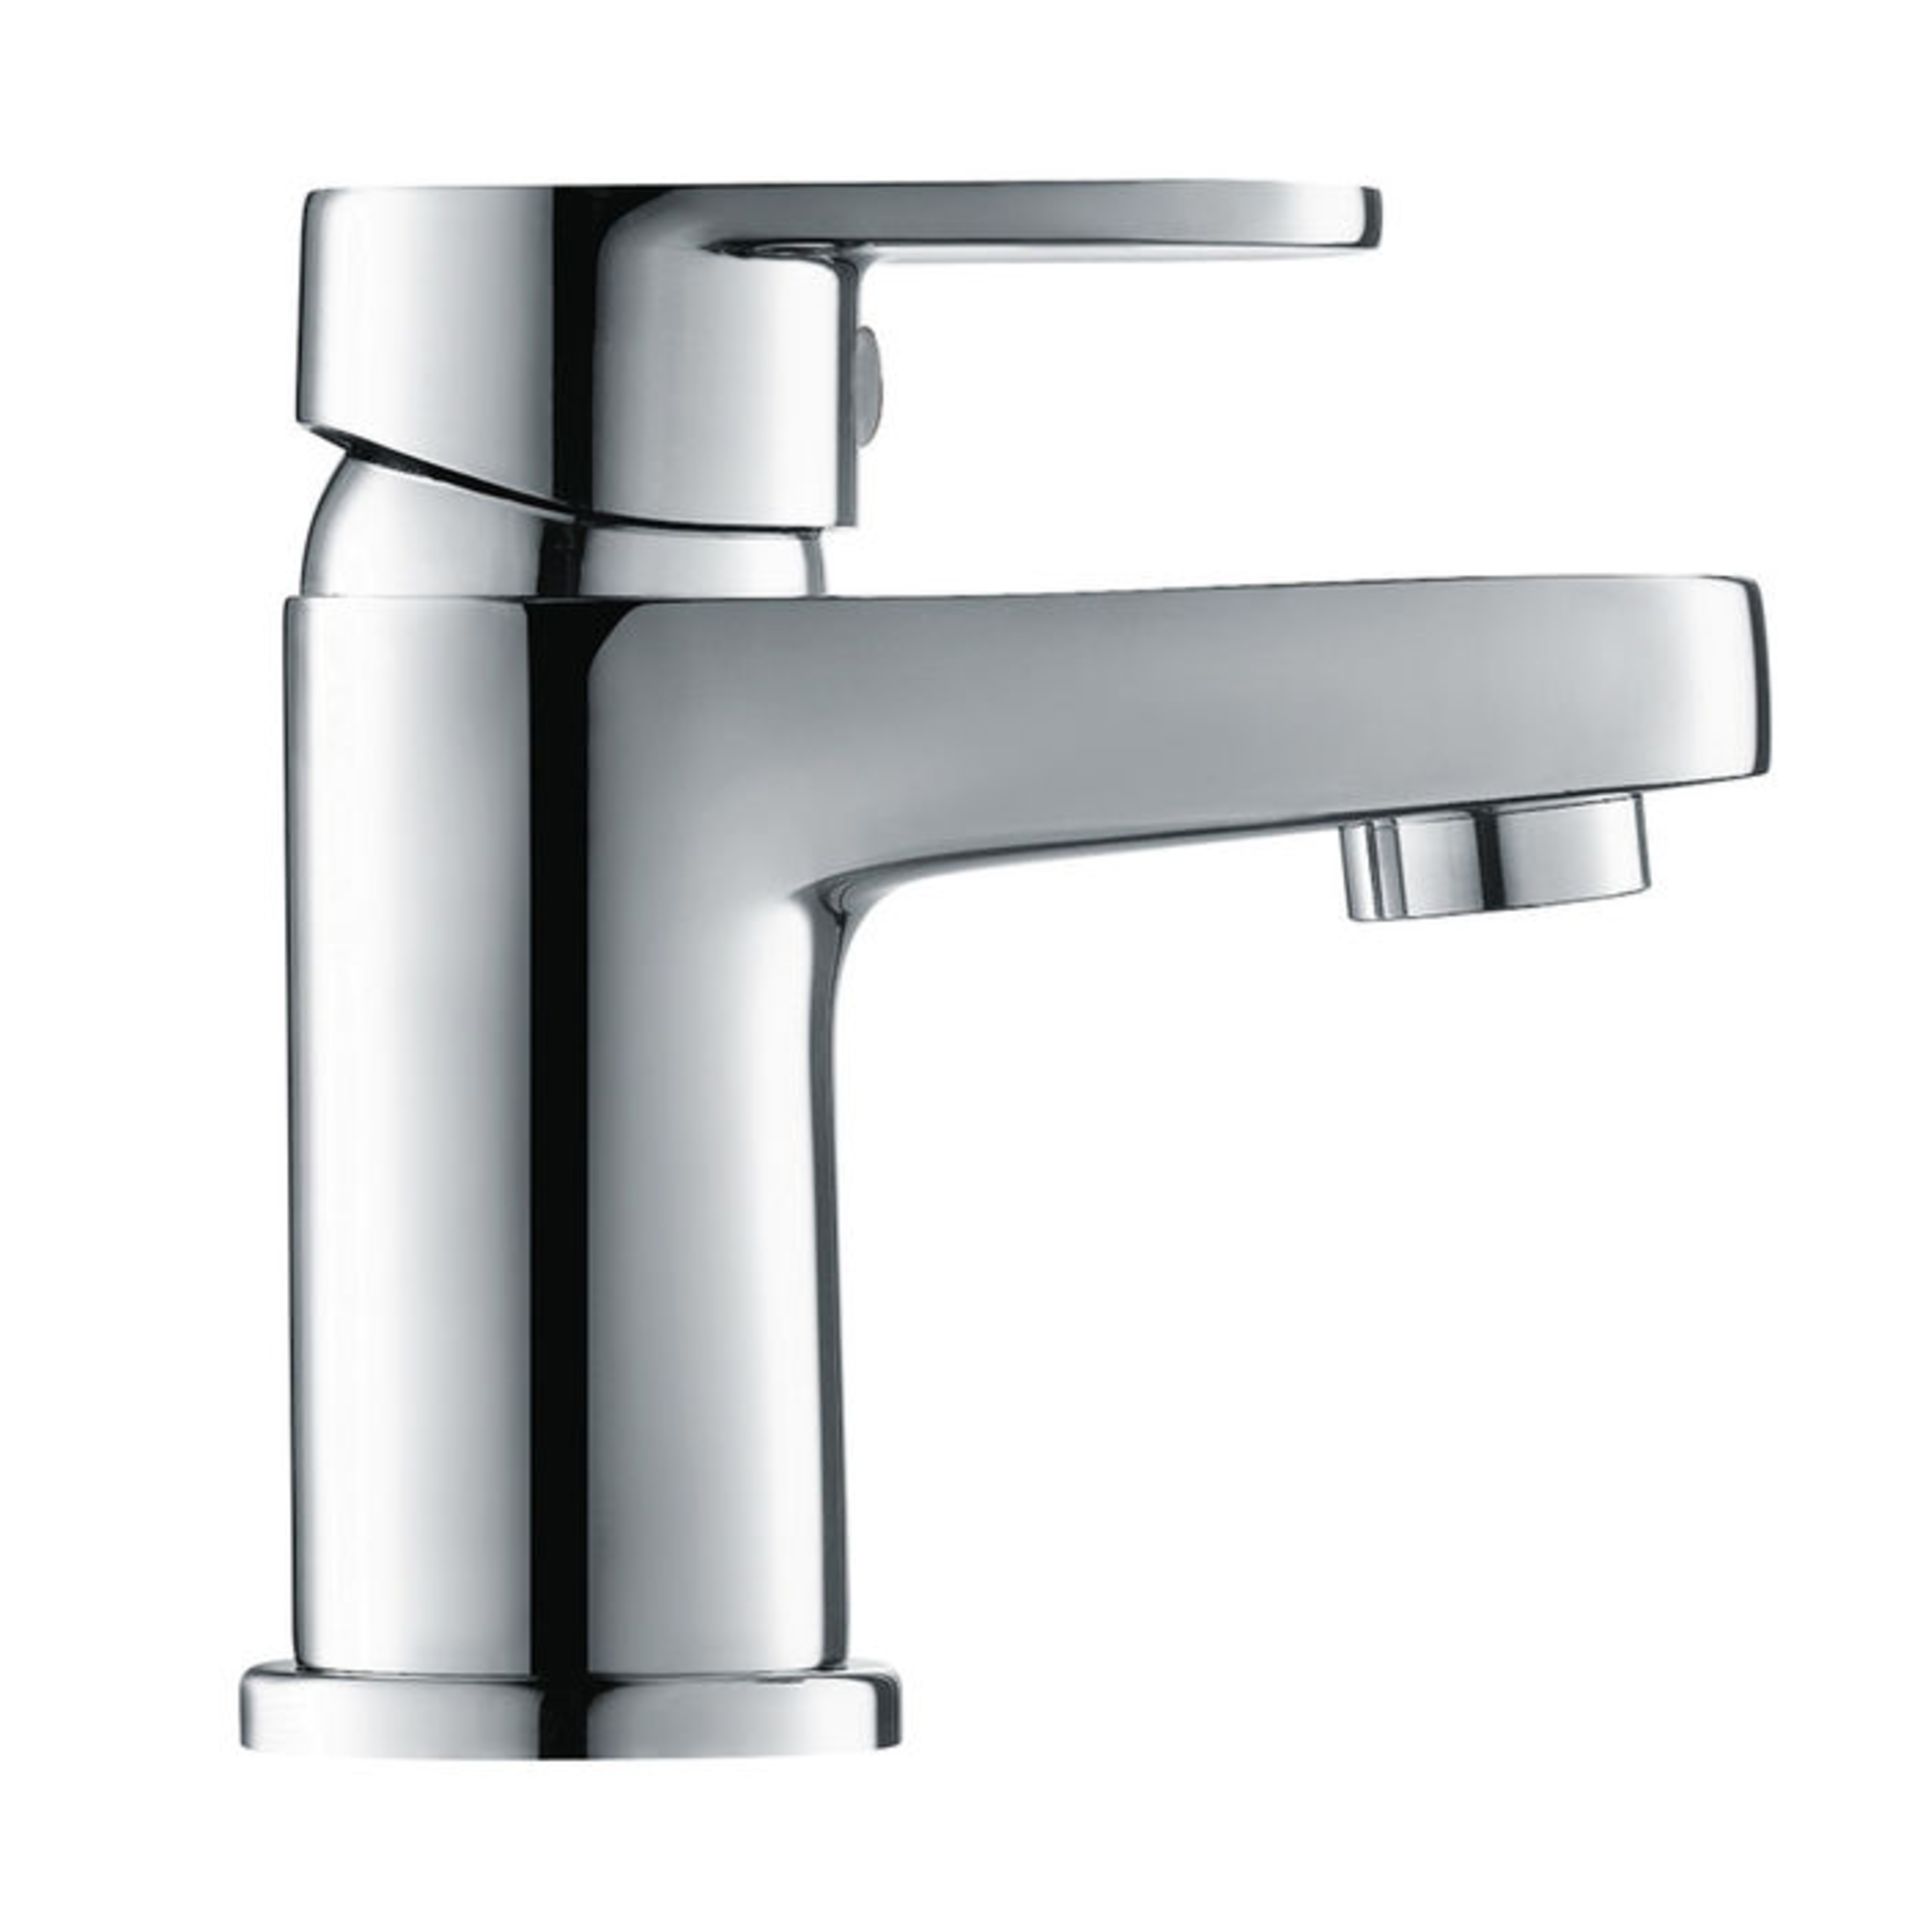 (D1026) Boll Mono Sink Mixer Tap - Cloakroom Chrome Plated Solid Brass Mixer cartridge Minim... - Image 2 of 2